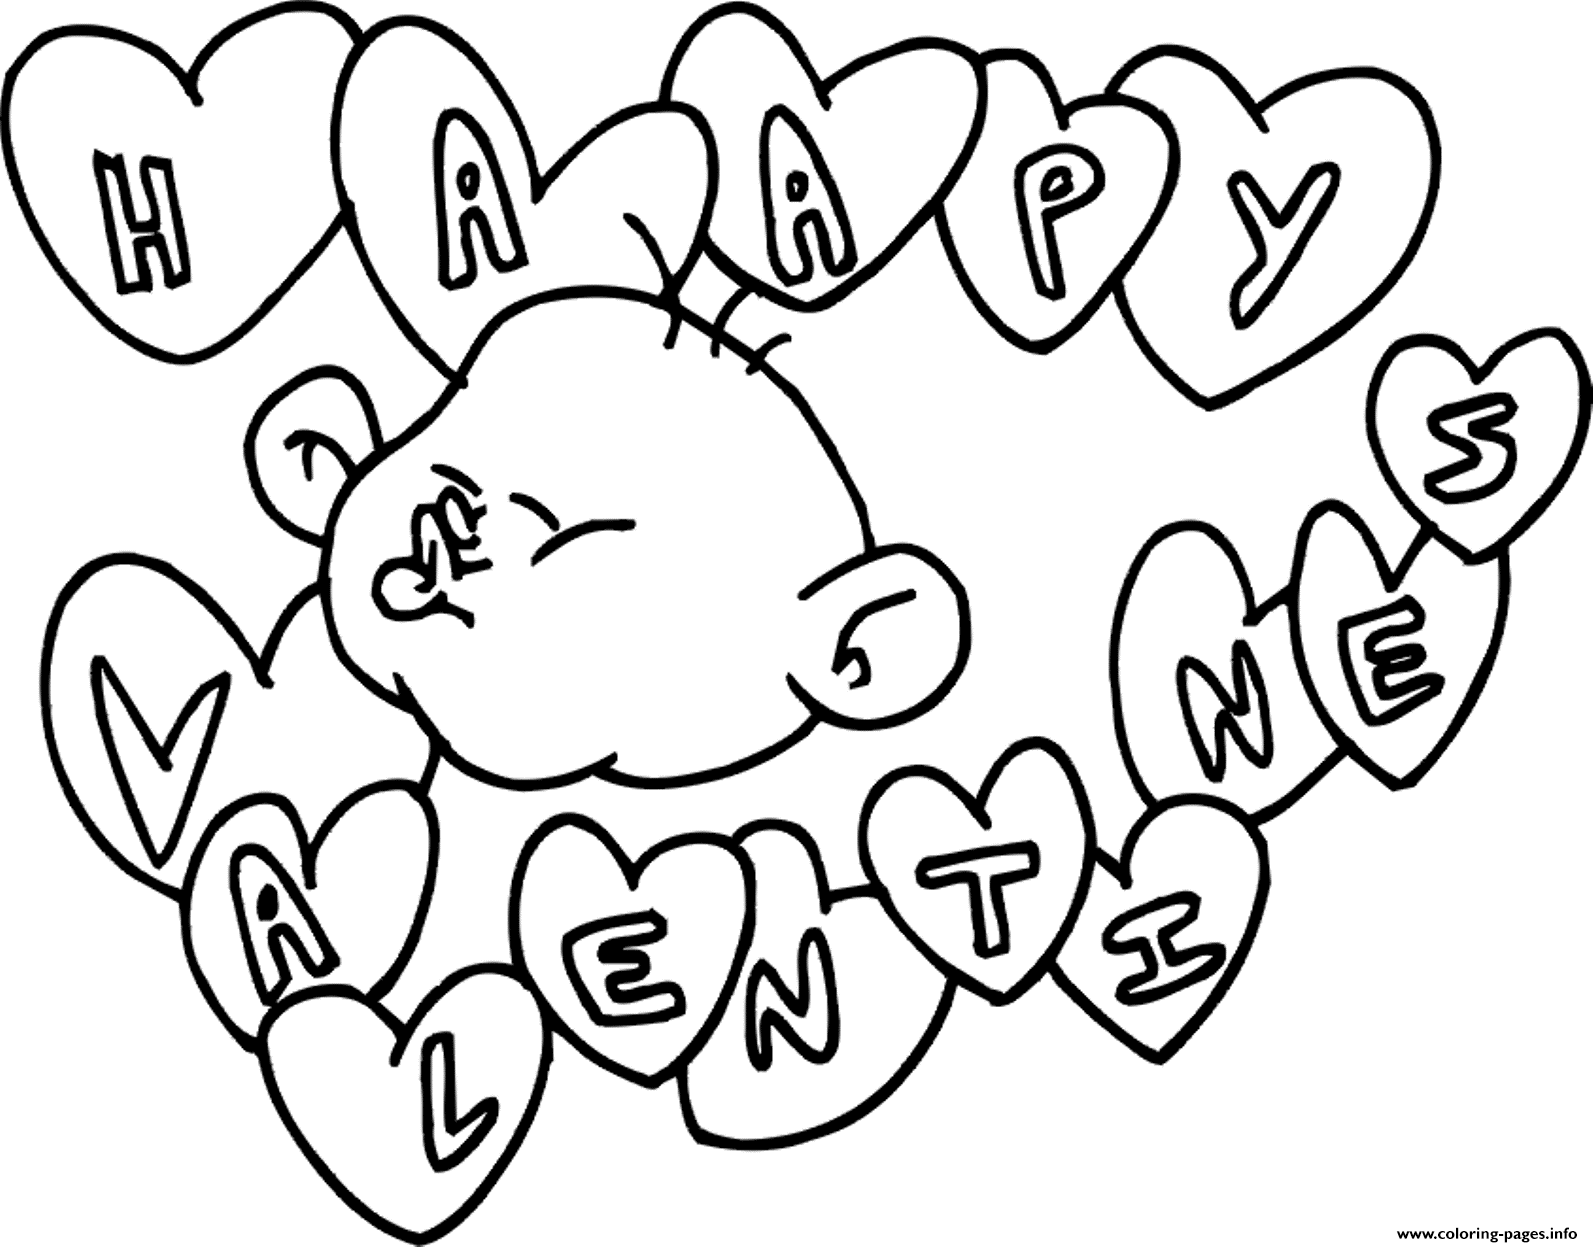 Printable Happy Valentines Day Sf911 coloring